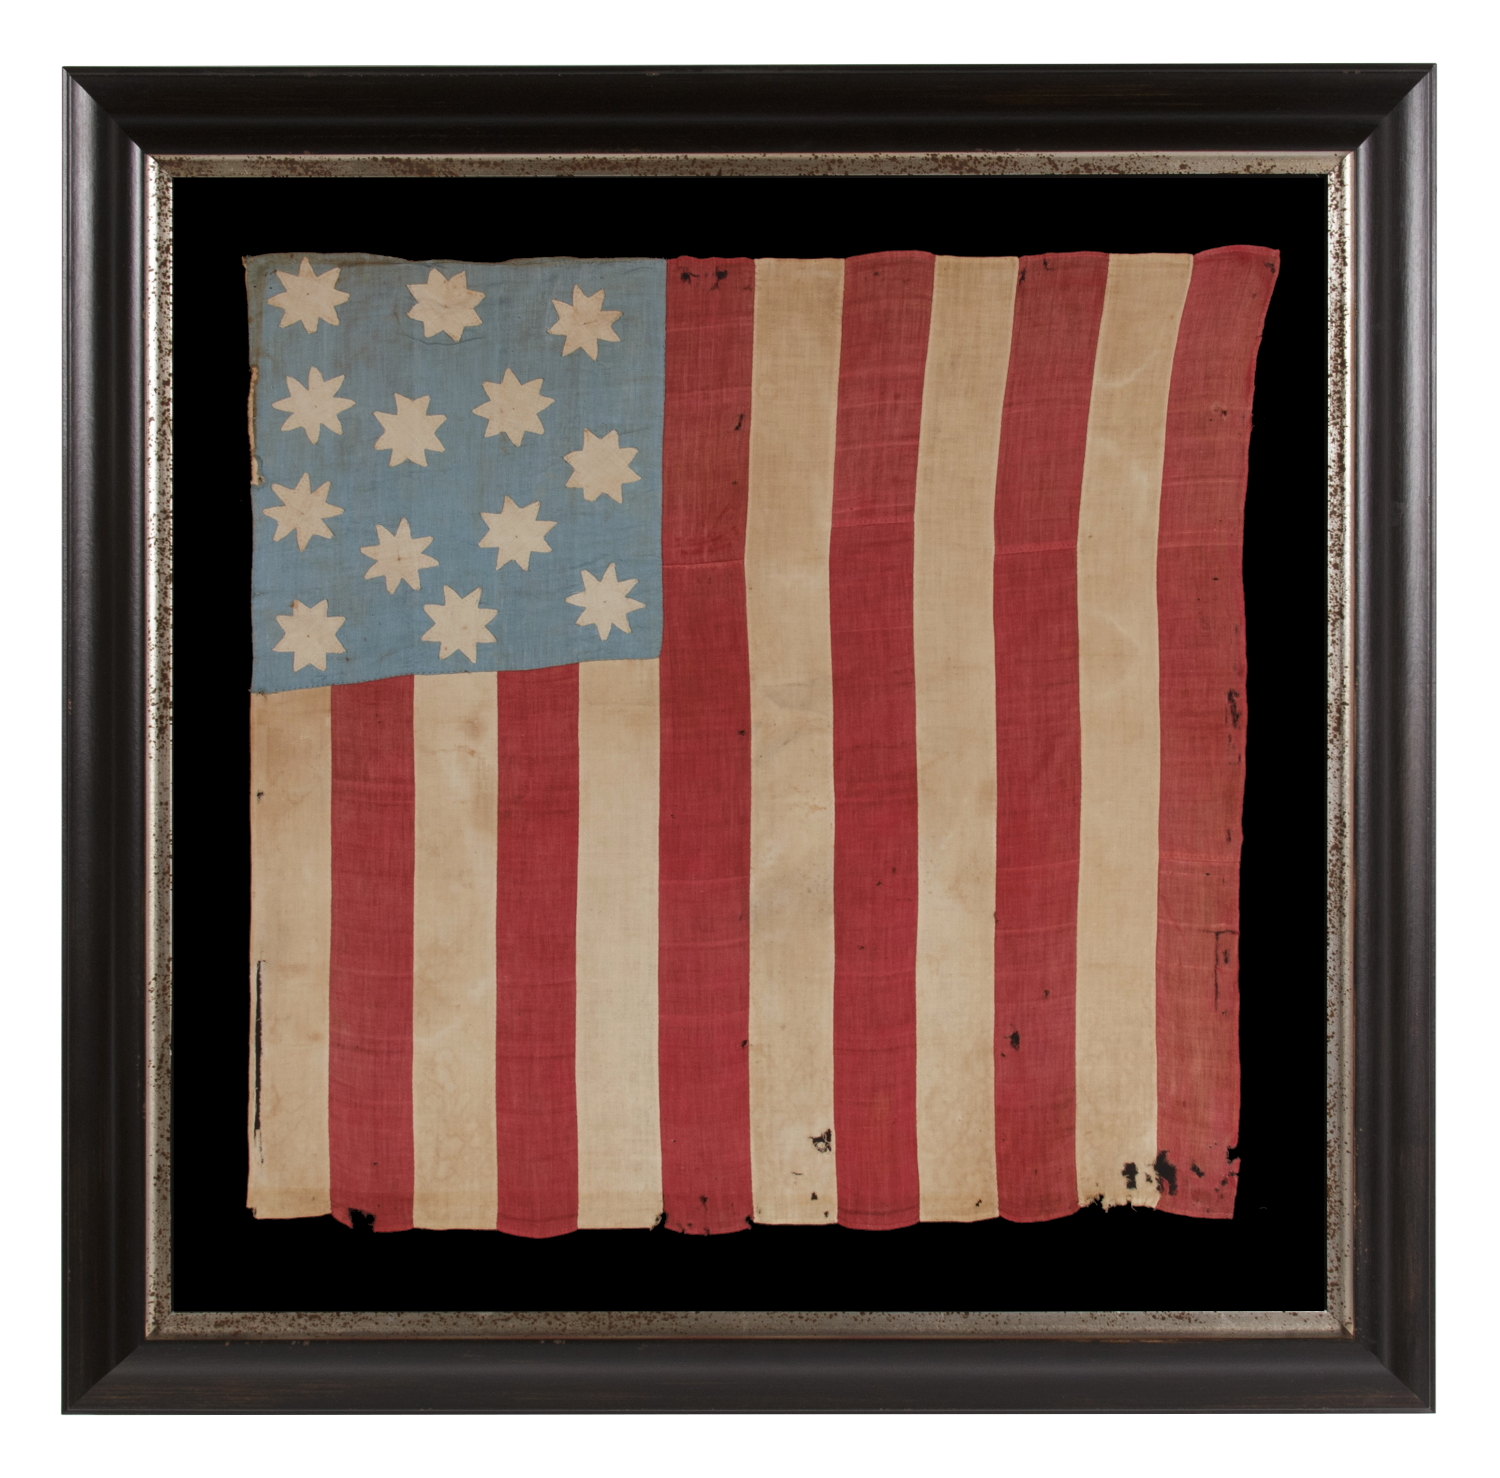 EXTRAORDINARY, HAND-SEWN, 13 STAR AMERICAN NATIONAL FLAG WITH 8-POINTED STARS ON A GLAZED COTTON, CORNFLOWER BLUE CANTON, 12 STRIPES, AND ITS CANTON RESTING ON THE WAR STRIPE, FOUND IN UPSTATE, NEW YORK, PRE-CIVIL WAR, CA 1830-1850; EXHIBITED AT THE MUSEUM OF THE AMERICAN REVOLUTION FROM JUNE – JULY, 2019